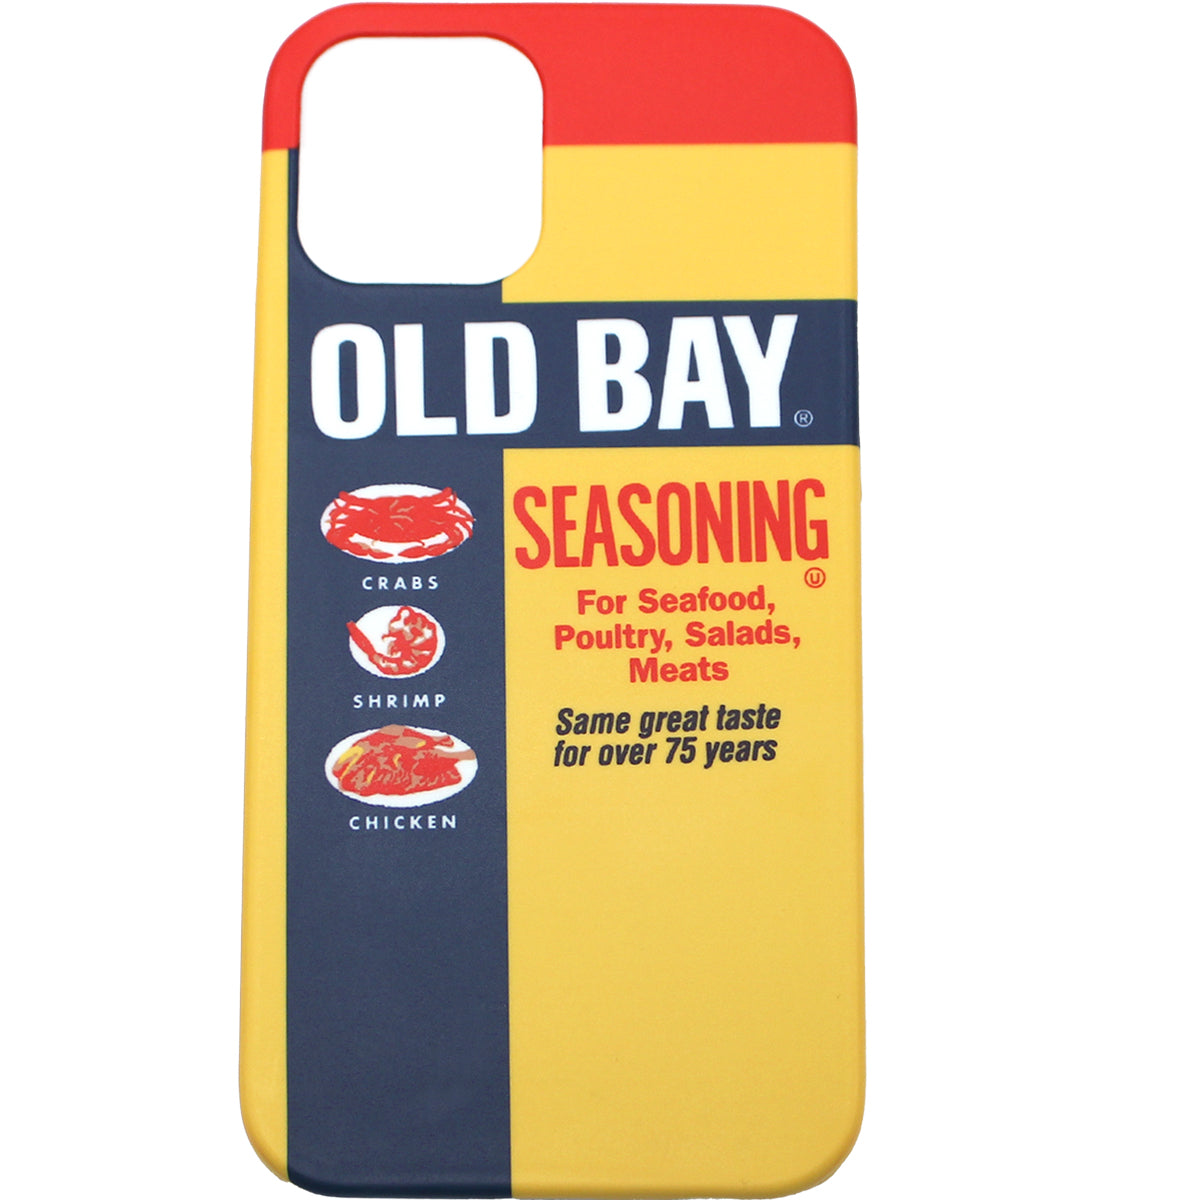 Old Bay Can / Phone Case - Route One Apparel